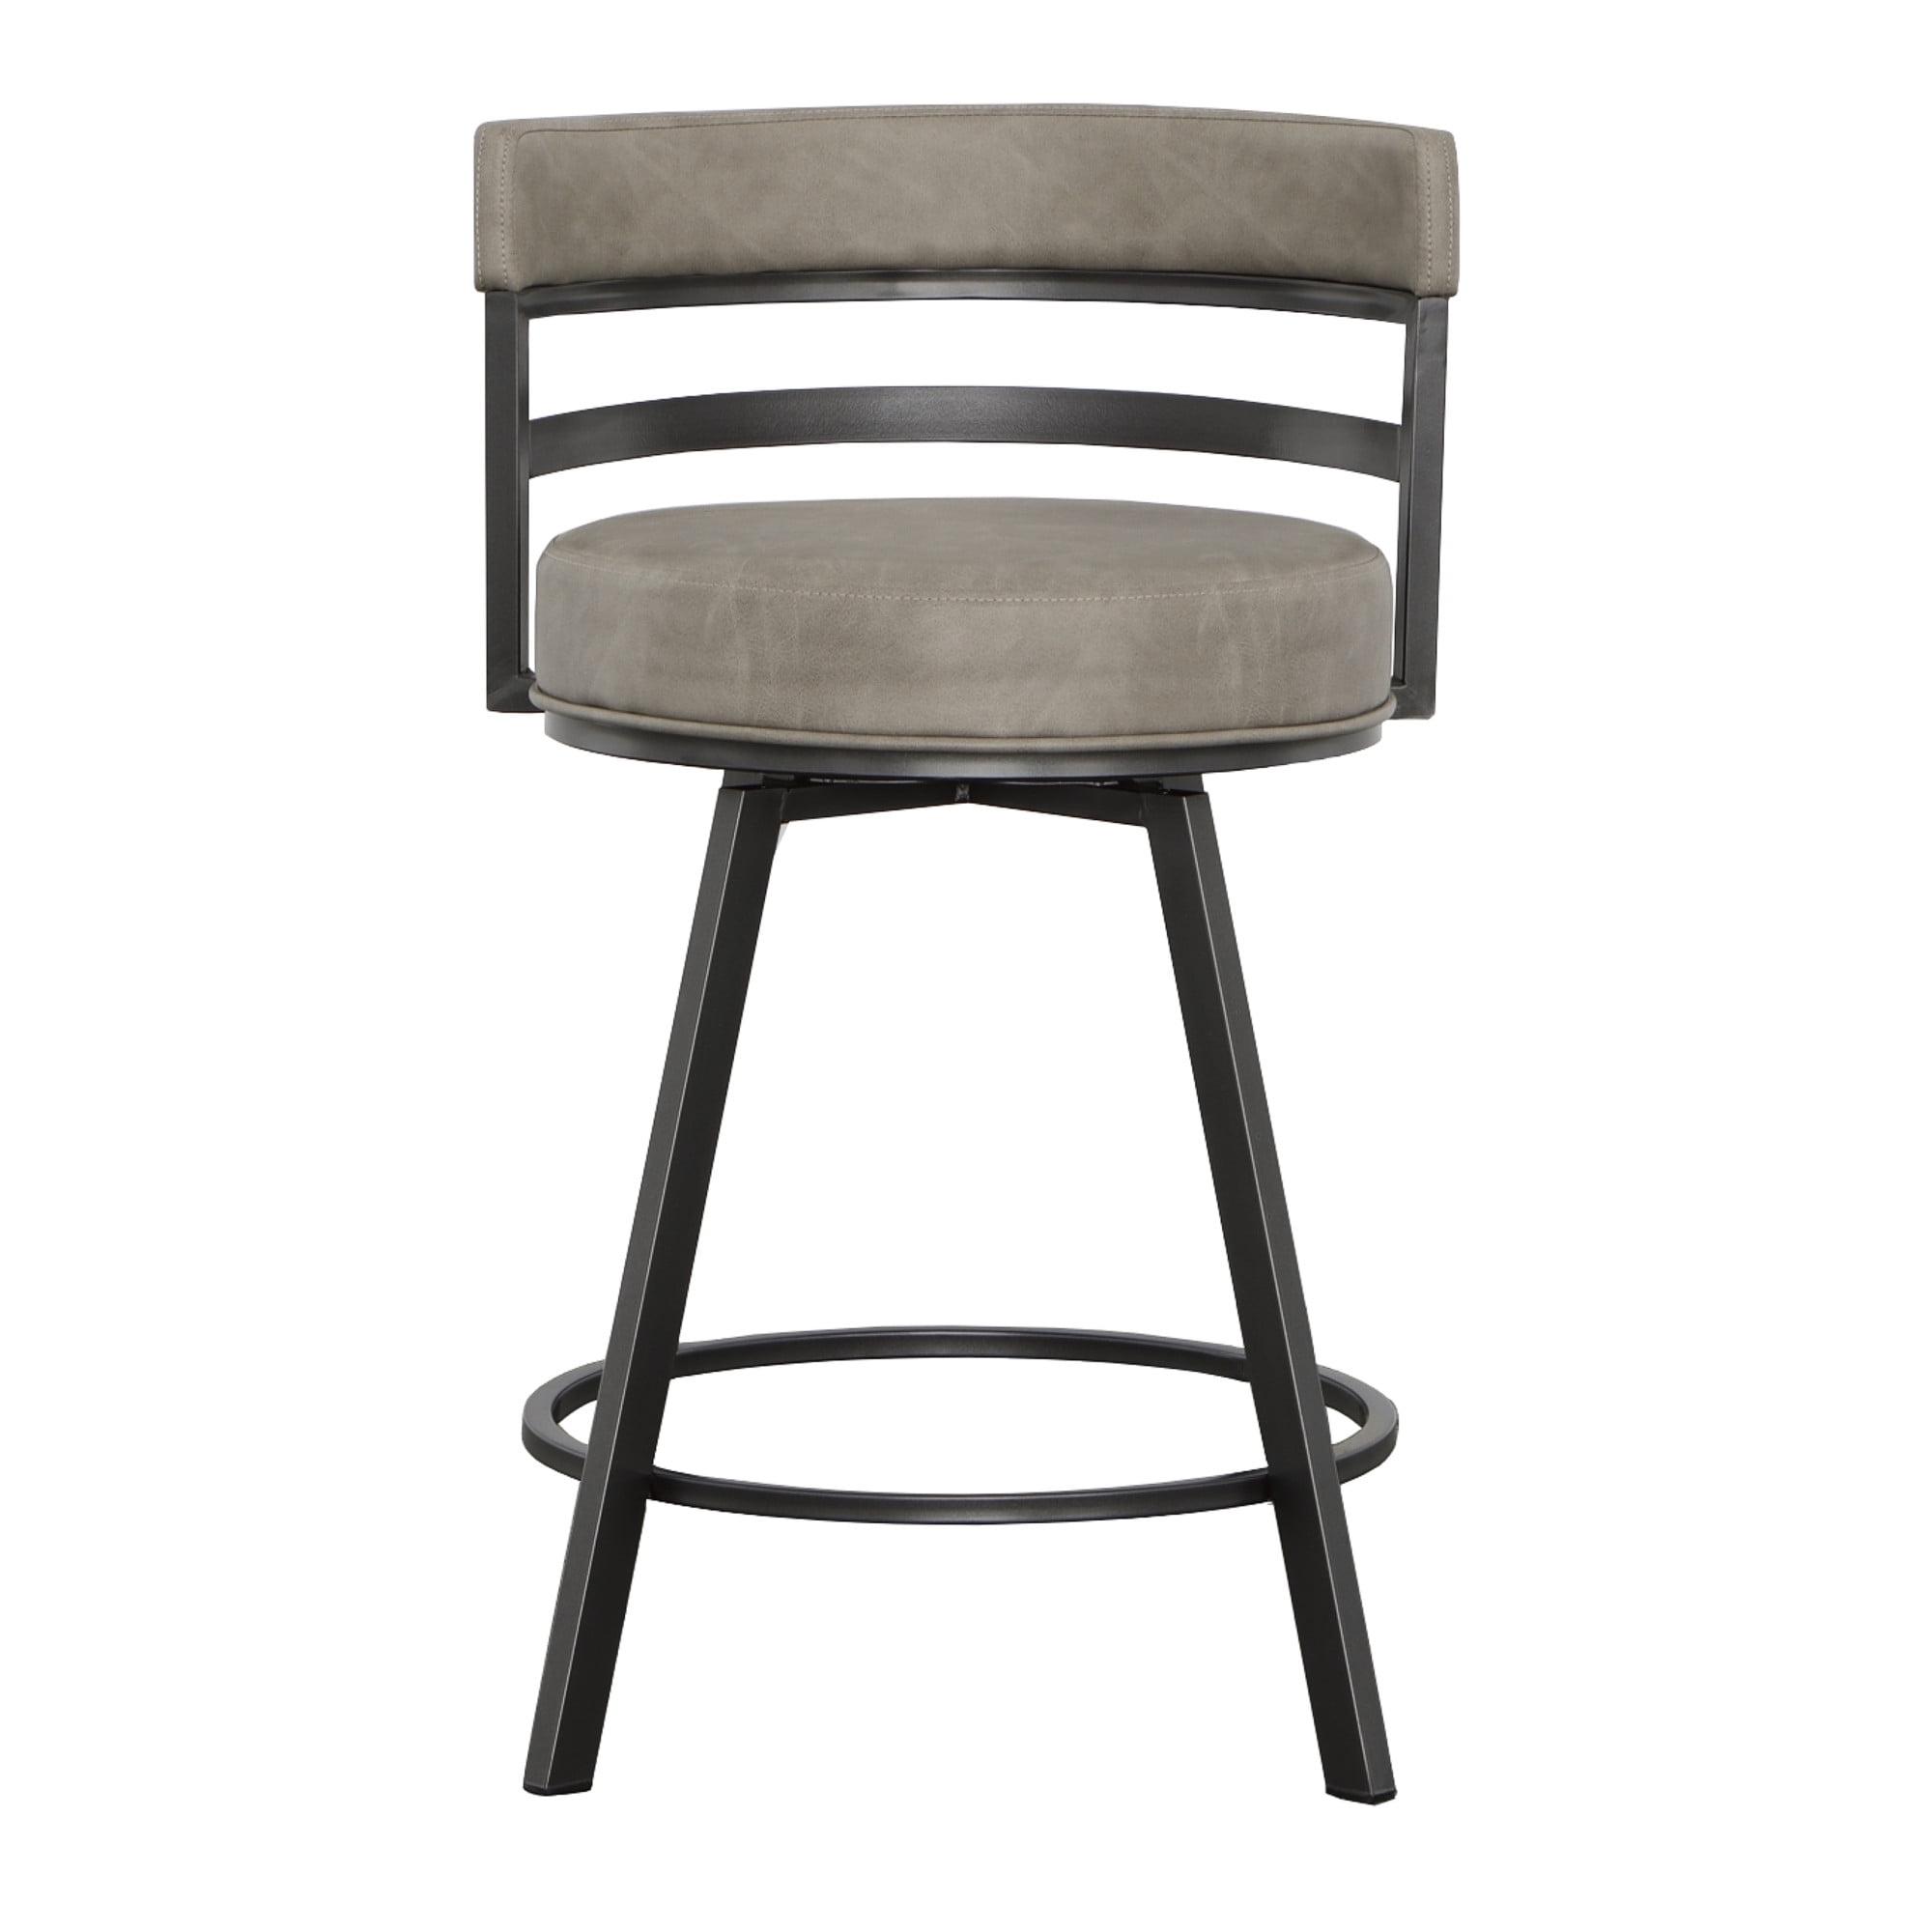 Transitional Beige Faux Leather Swivel Counter Stool